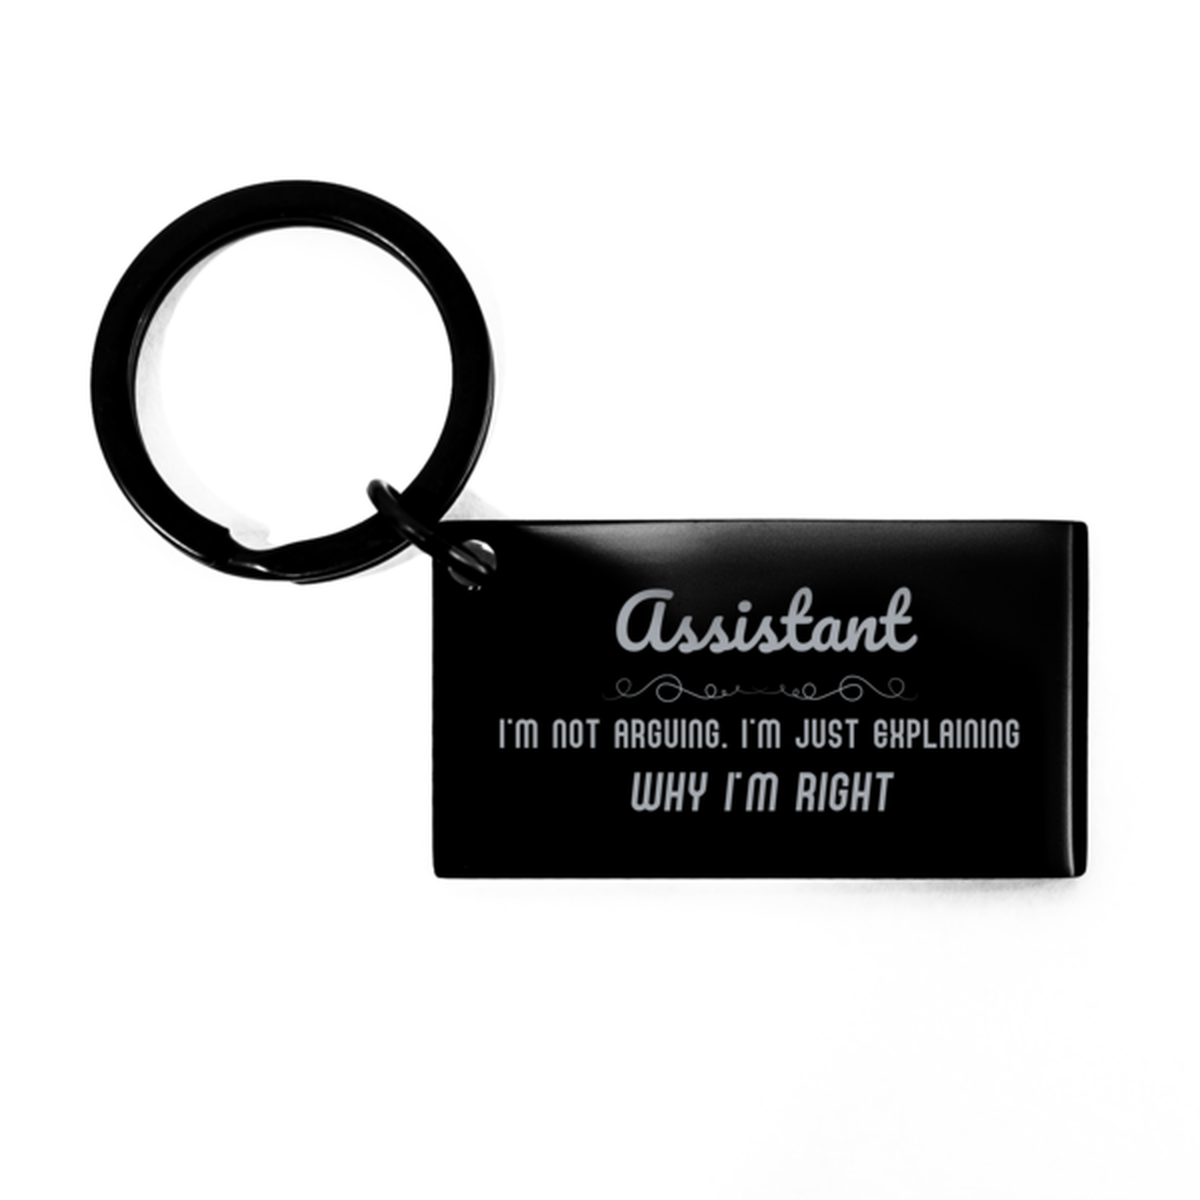 Assistant I'm not Arguing. I'm Just Explaining Why I'm RIGHT Keychain, Funny Saying Quote Assistant Gifts For Assistant Graduation Birthday Christmas Gifts for Men Women Coworker